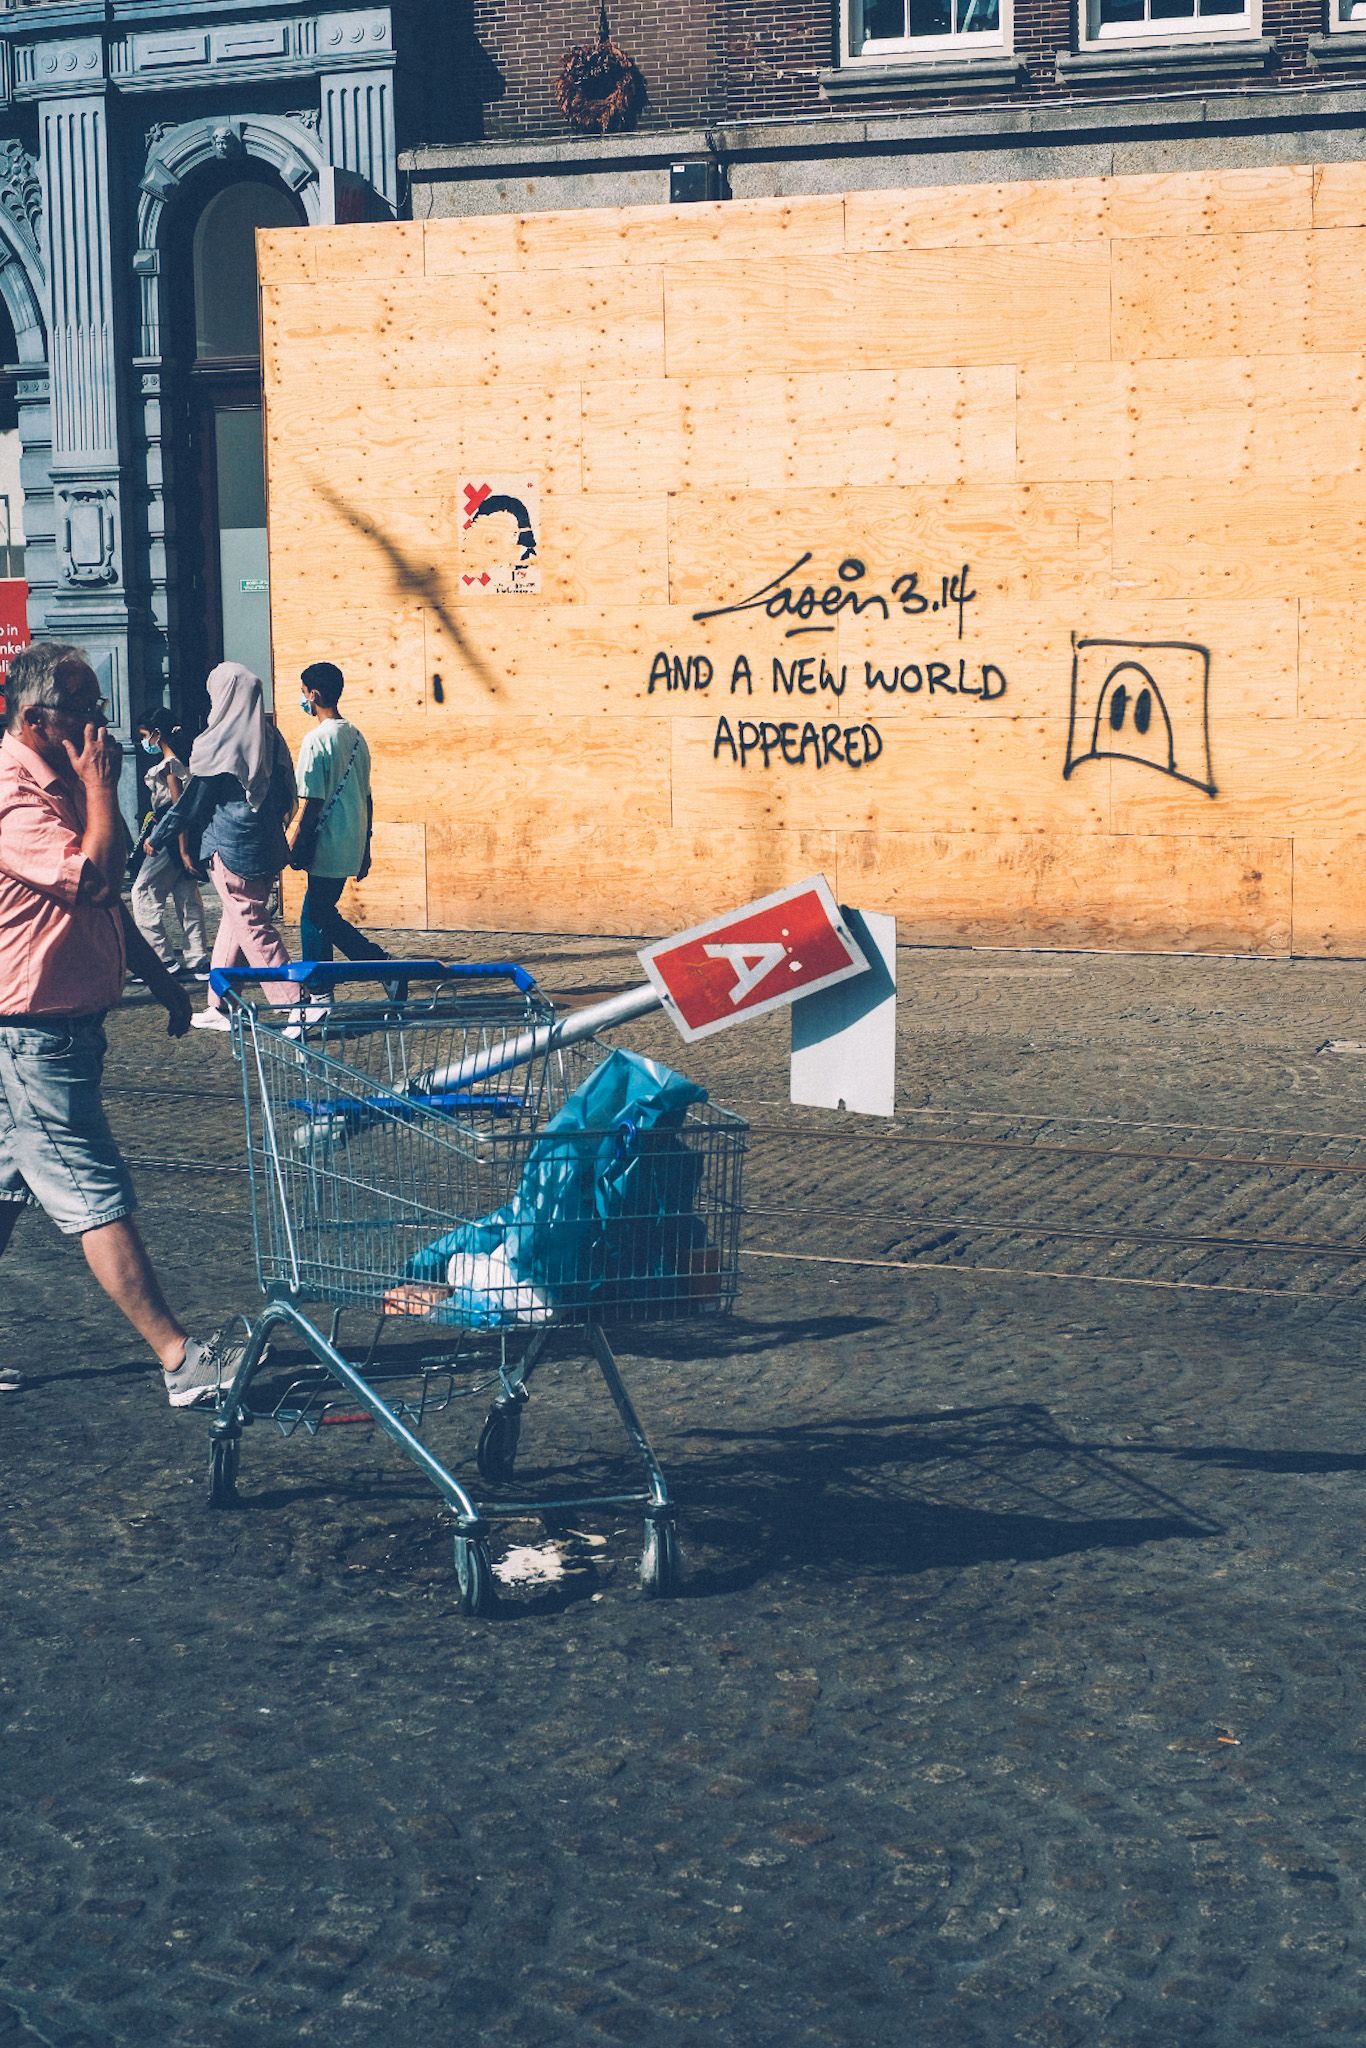 In an open square of Amsterdam, a shopping cart with a little red pennant A hanging off of it stands on the left side of the image. People pass through the sunlit square, in front of a wooden wall that says “And a new world appears” as a bird flies in front of it and leaves a shadow.